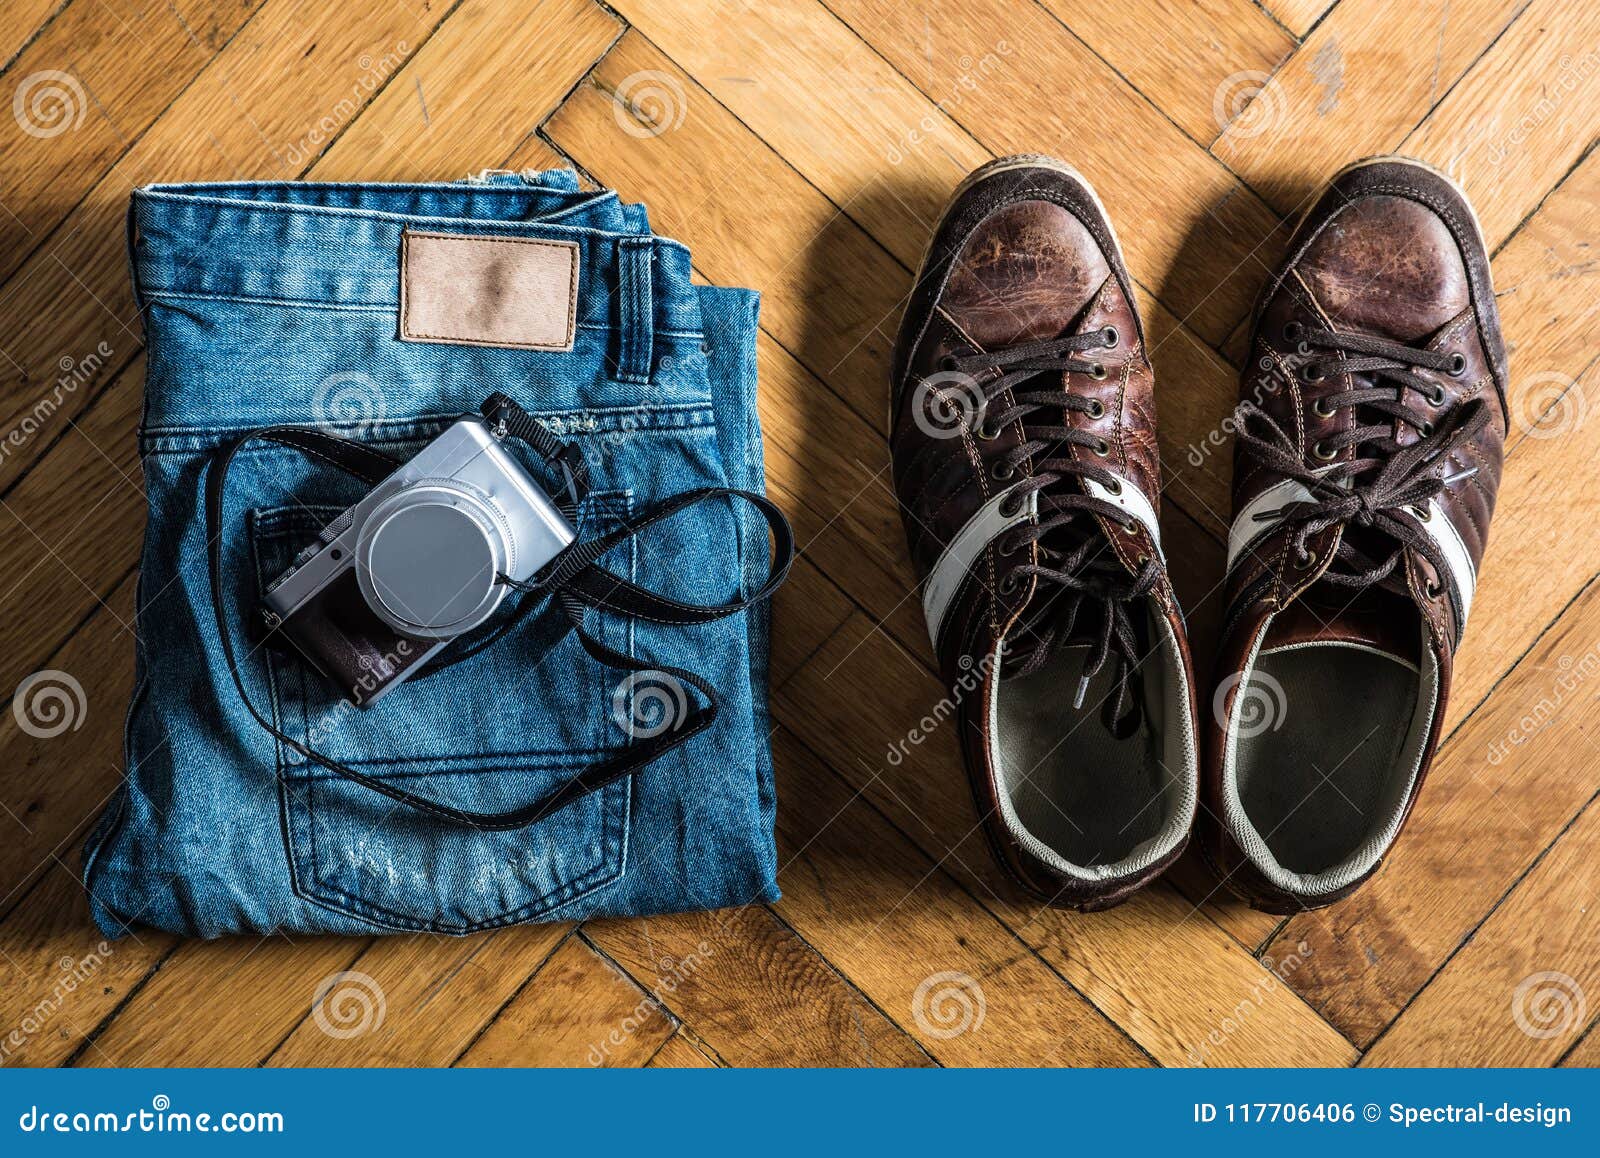 Blue Jeans, Brown Shoes, and a Camera Stock Photo - Image of home ...